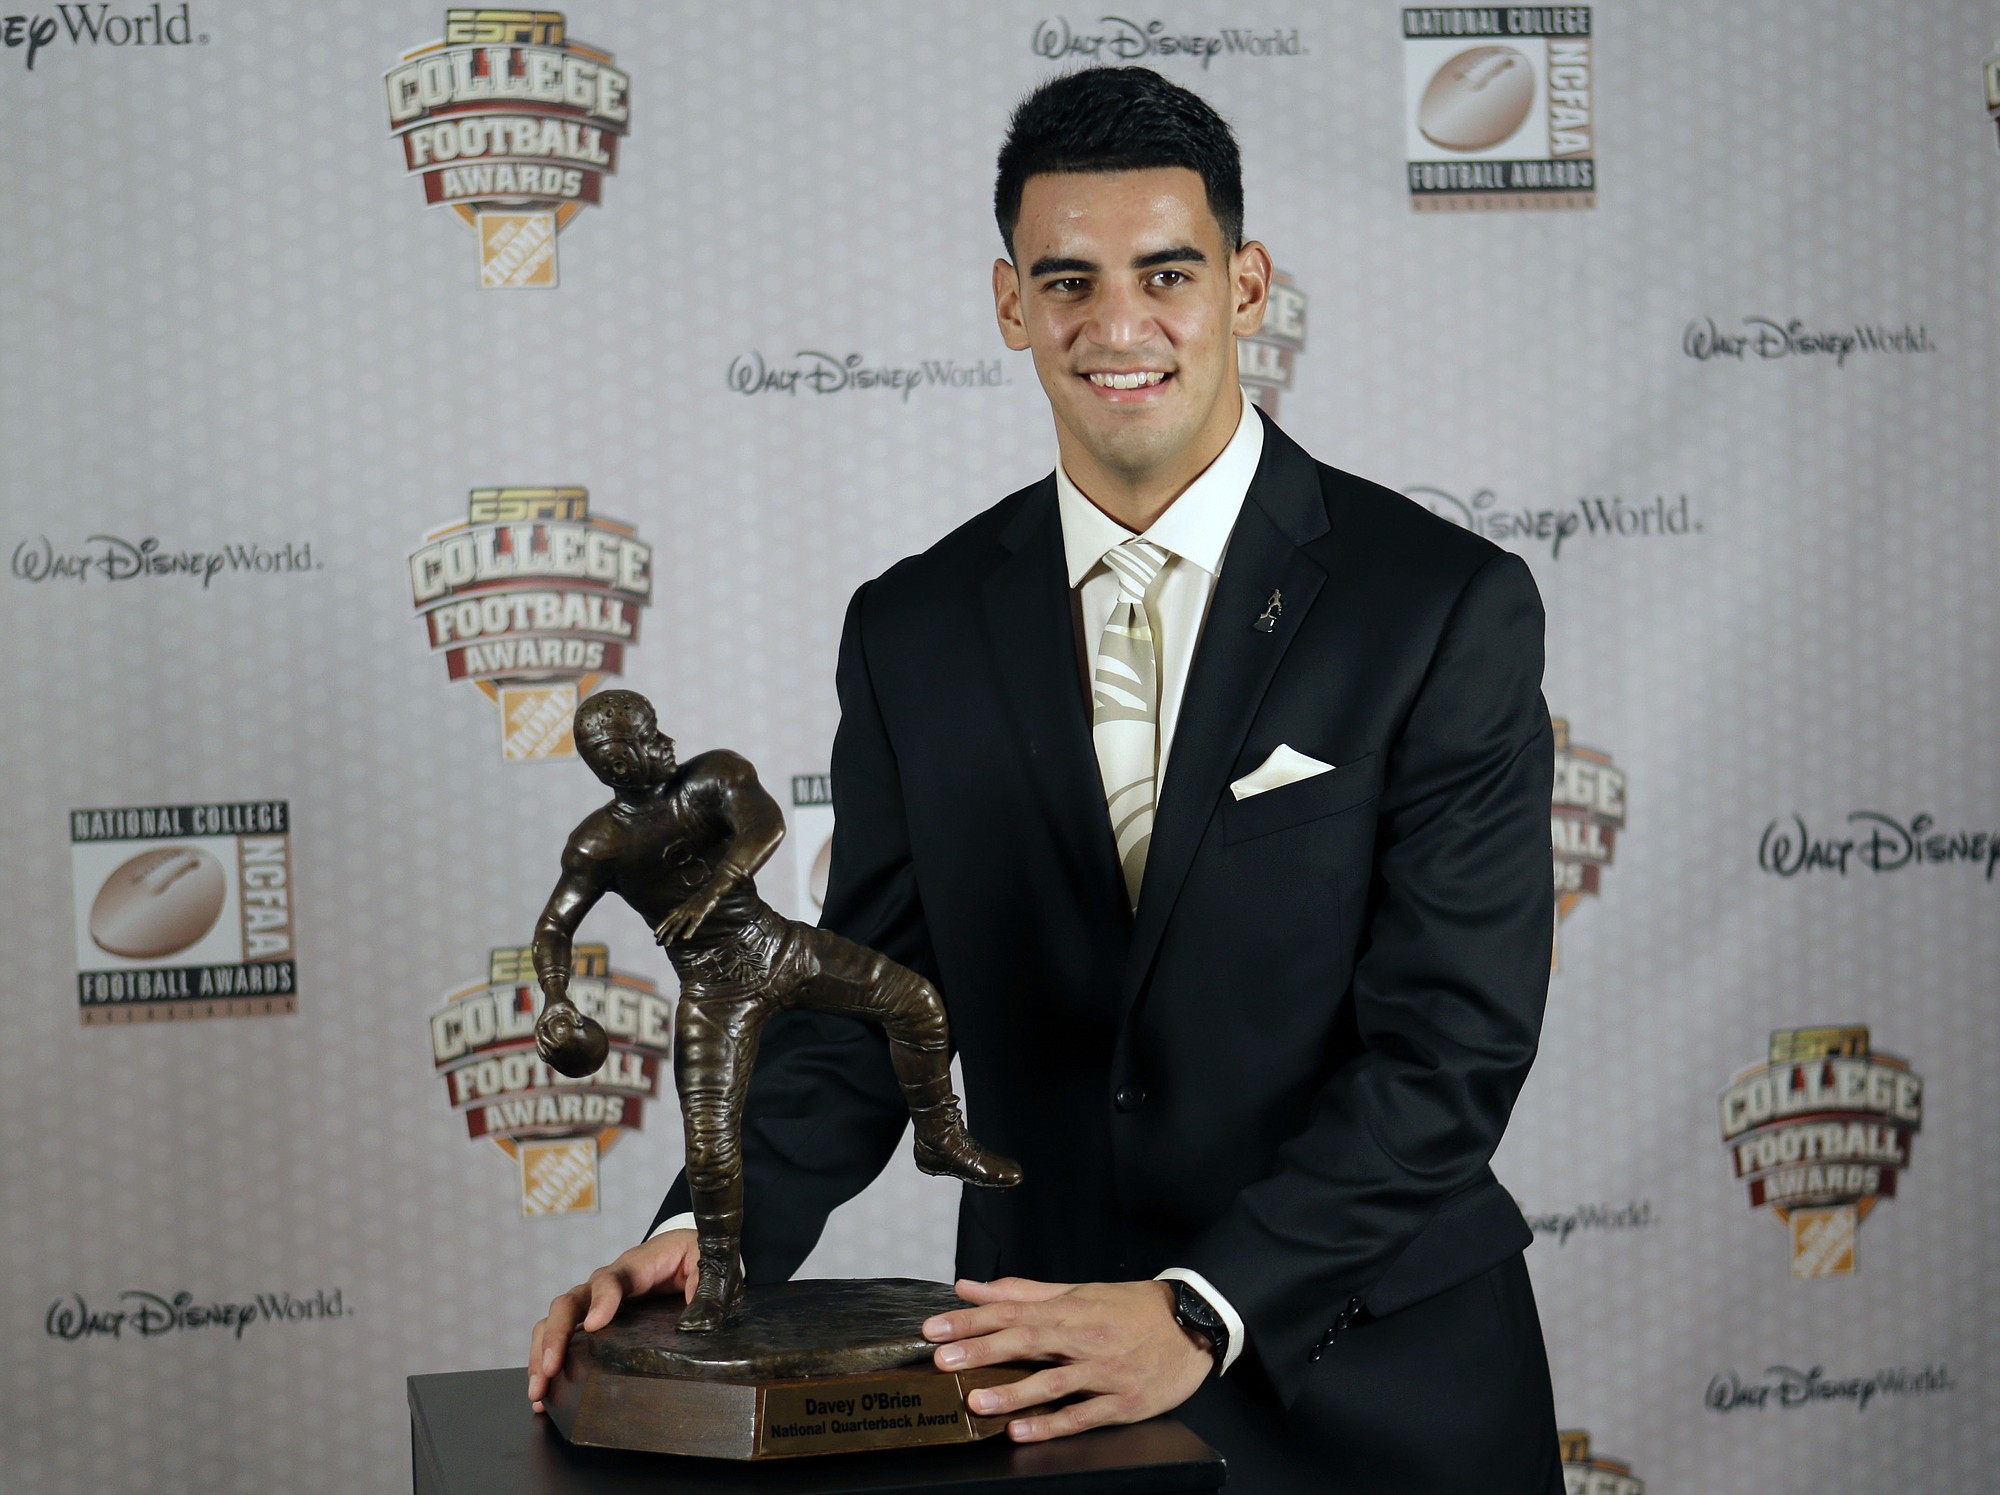 Oregon's Marcus Mariota stands with his trophy after being awarded the Davey O'Brien Award for Nation's Best Quarterback at the College Football Awards, Thursday, Dec. 11, 2014, in Lake Buena Vista, Fla.